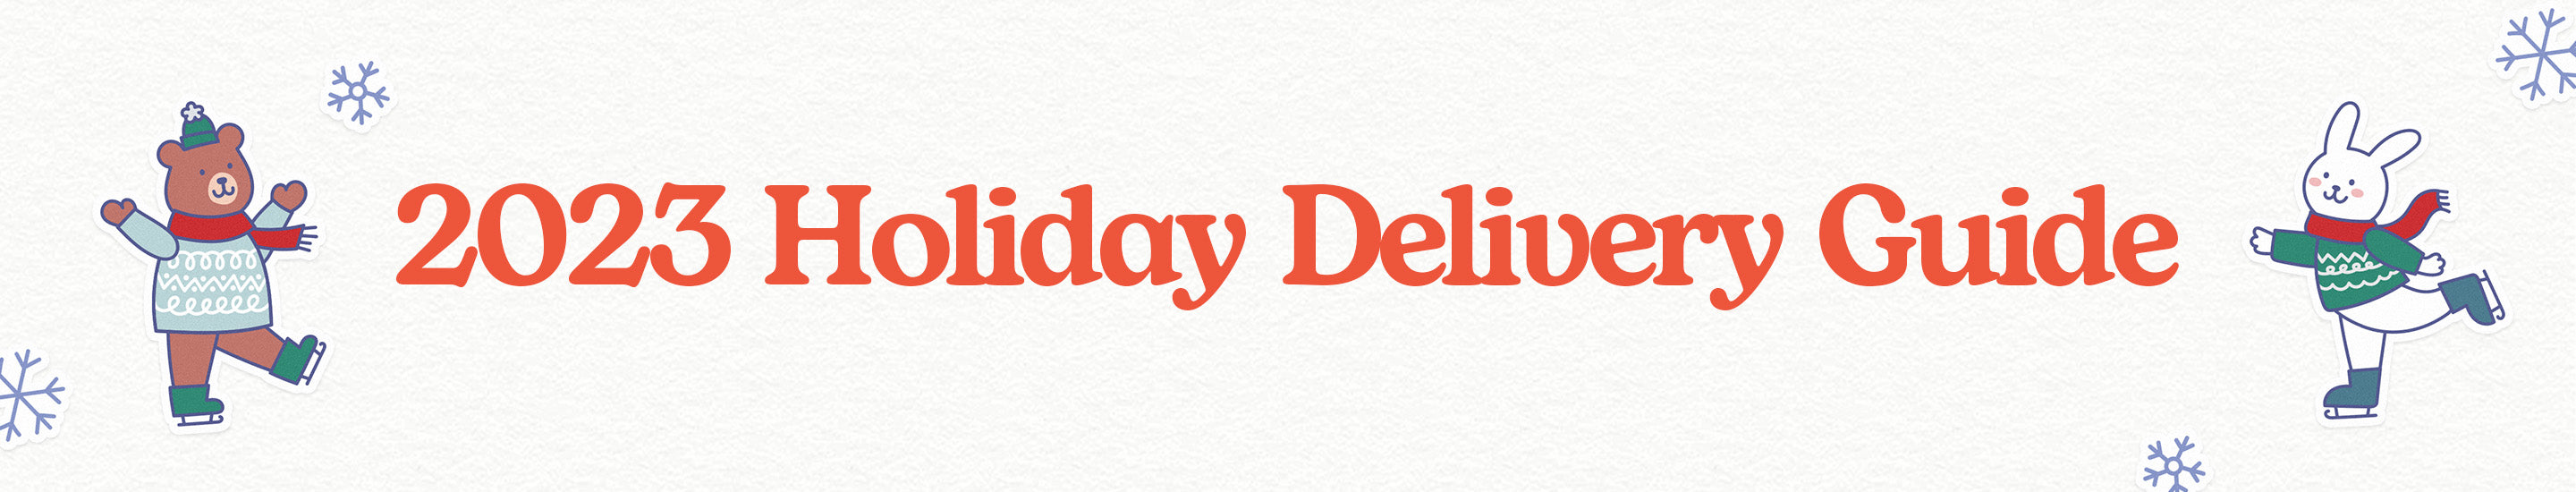 Holiday Delivery Guide